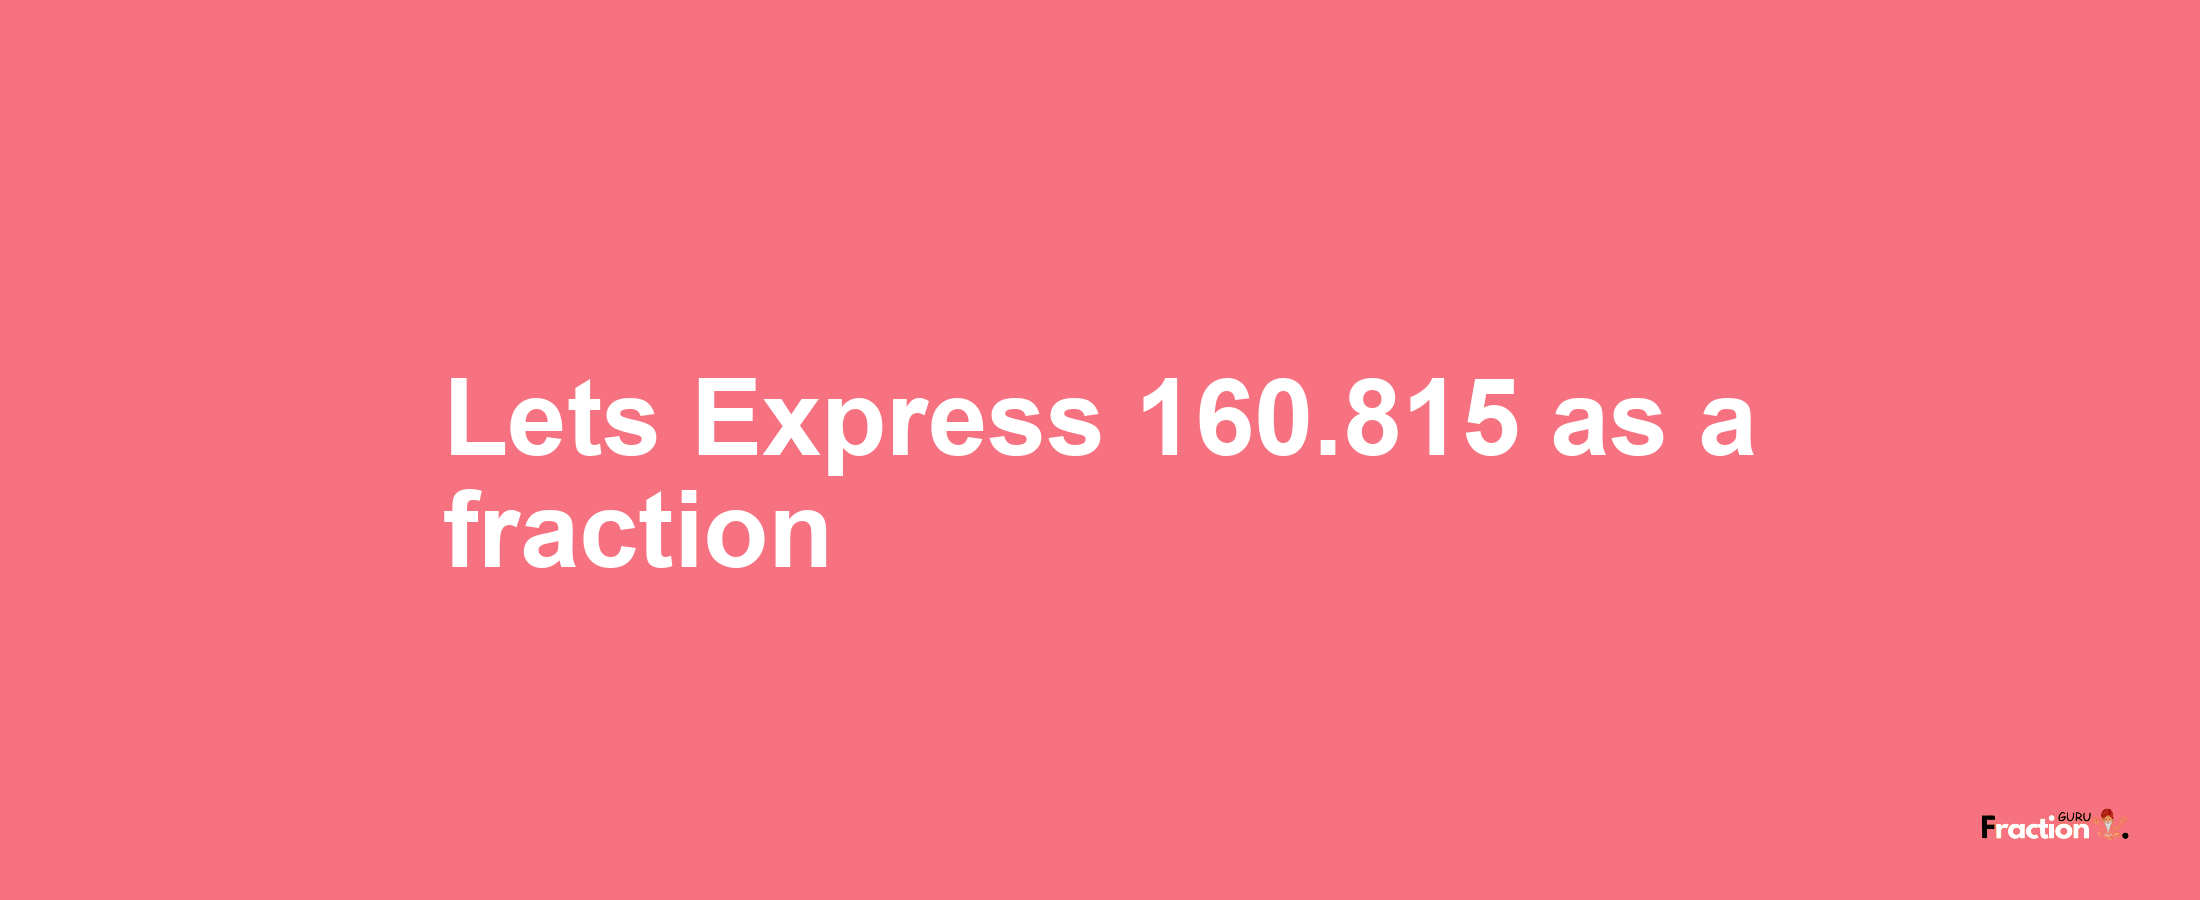 Lets Express 160.815 as afraction